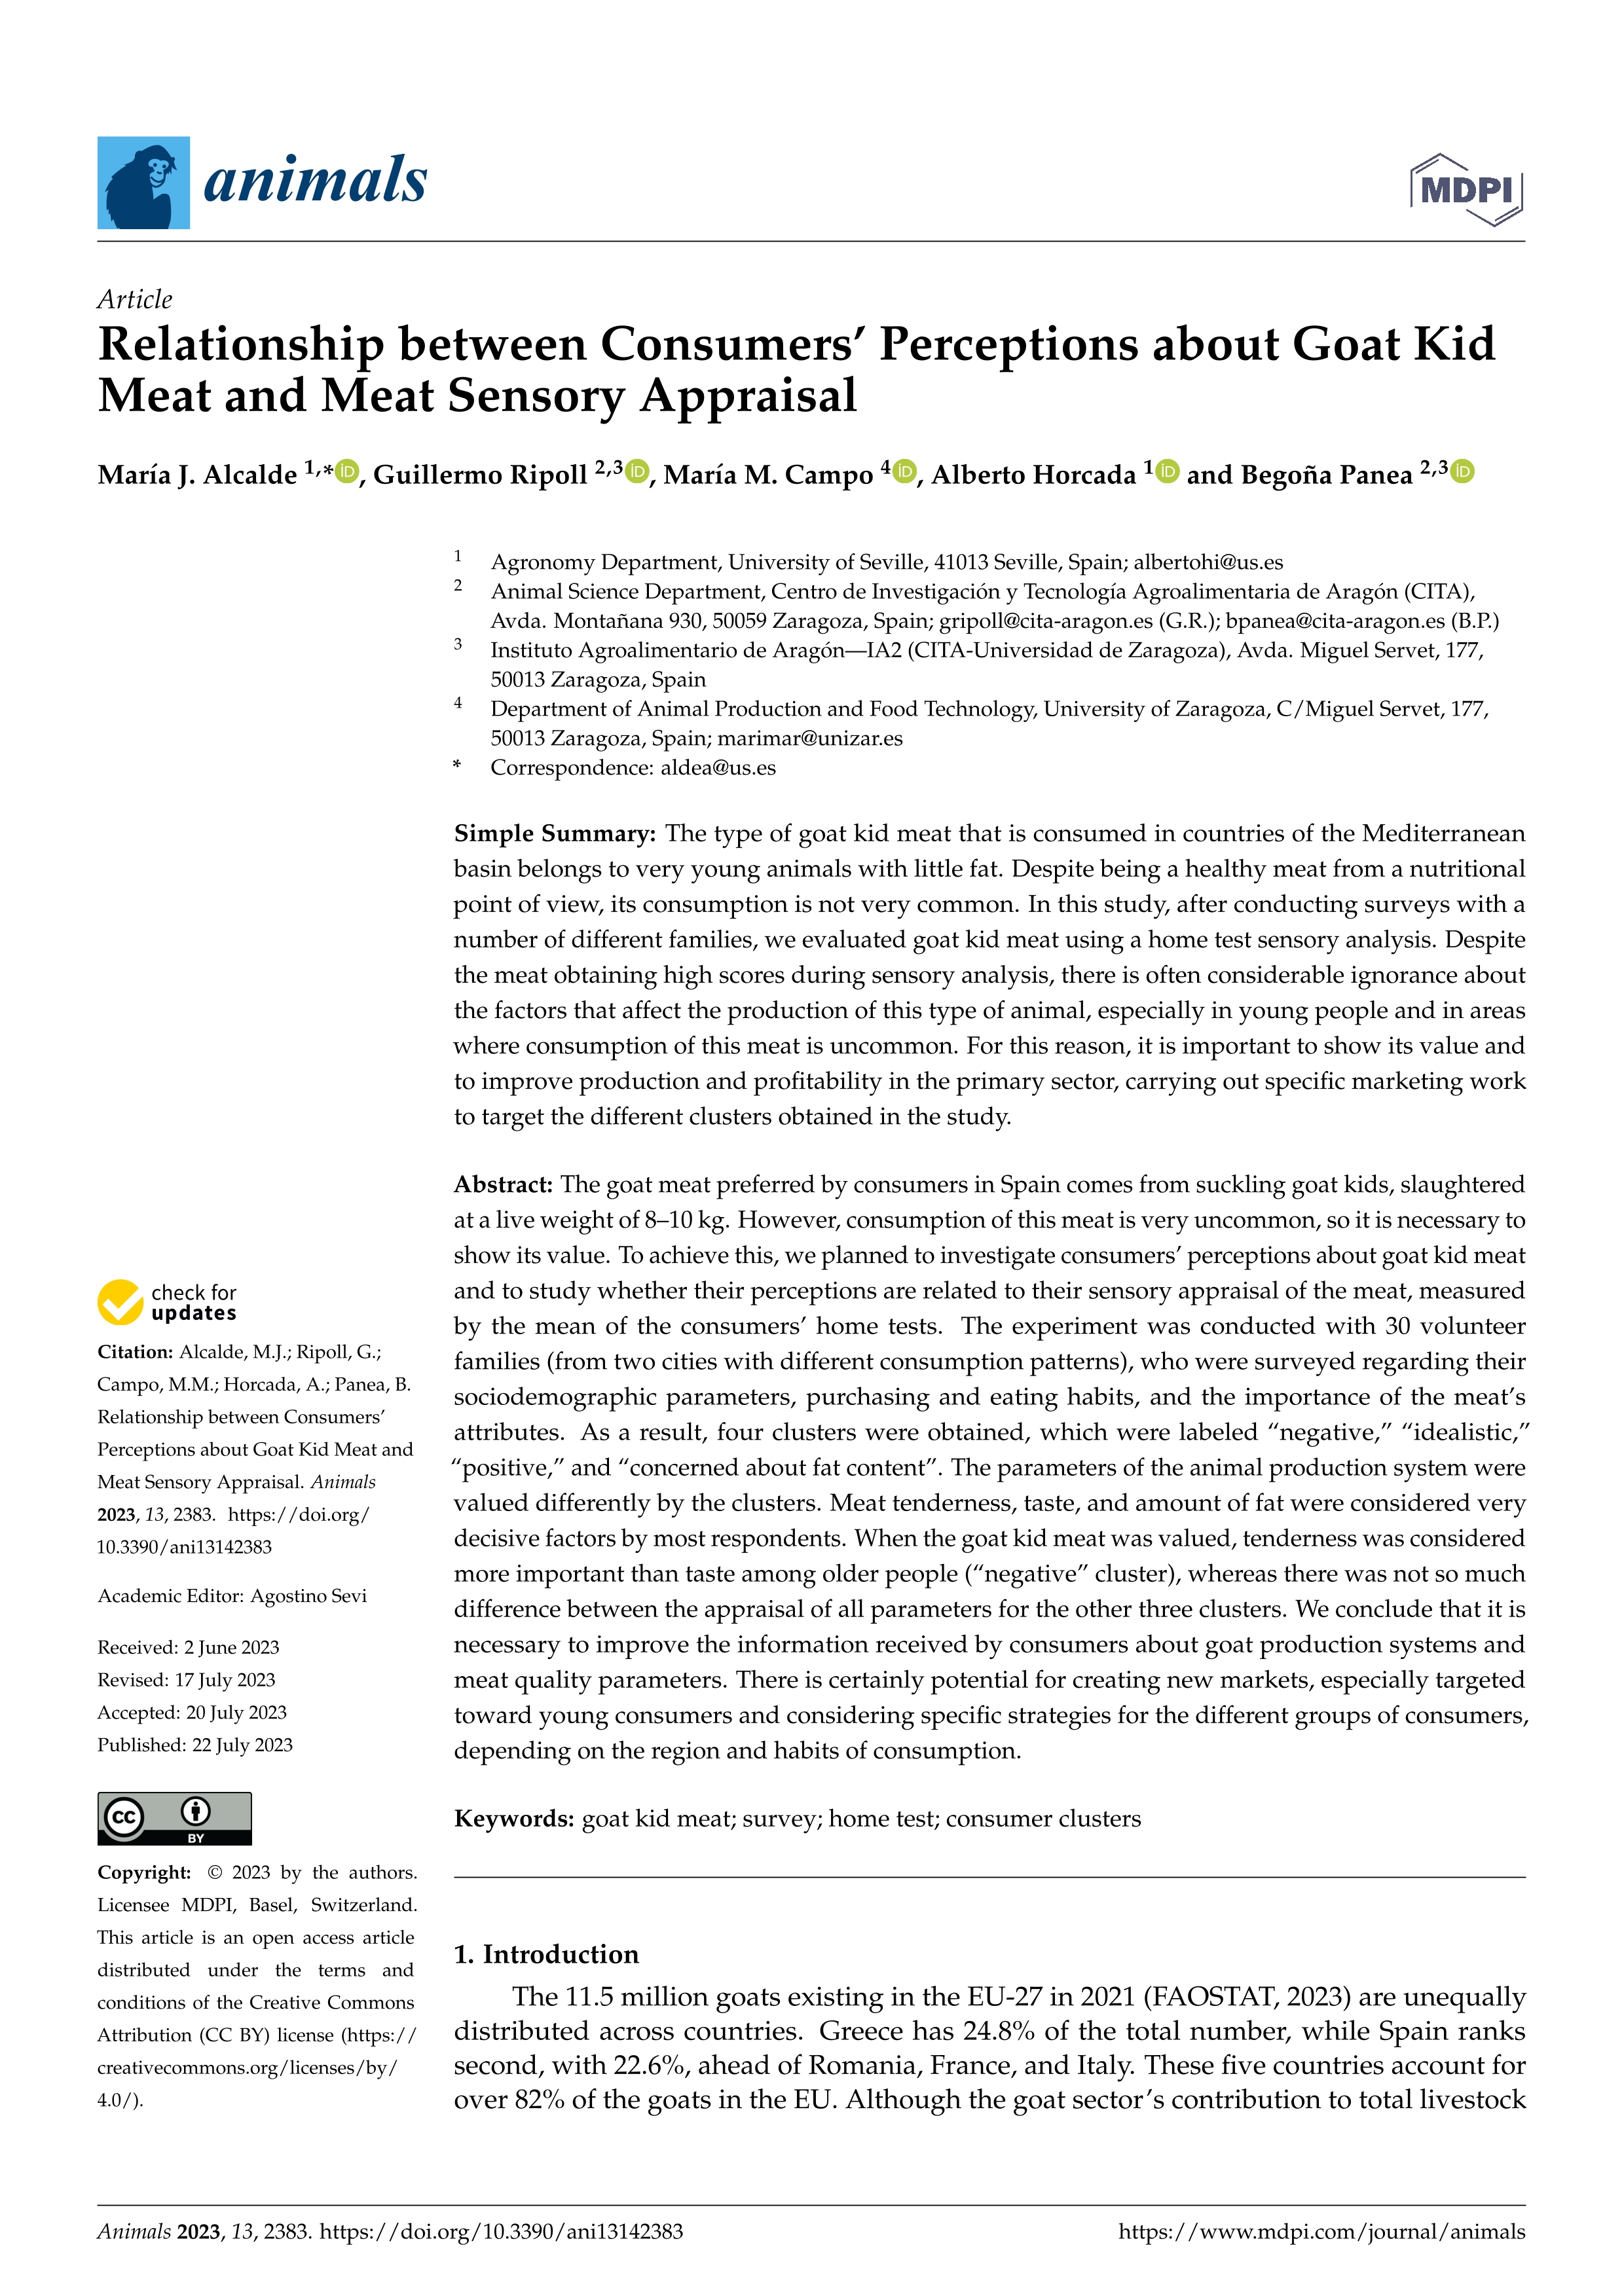 Relationship between consumers’ perceptions about goat kid meat and meat sensory appraisal